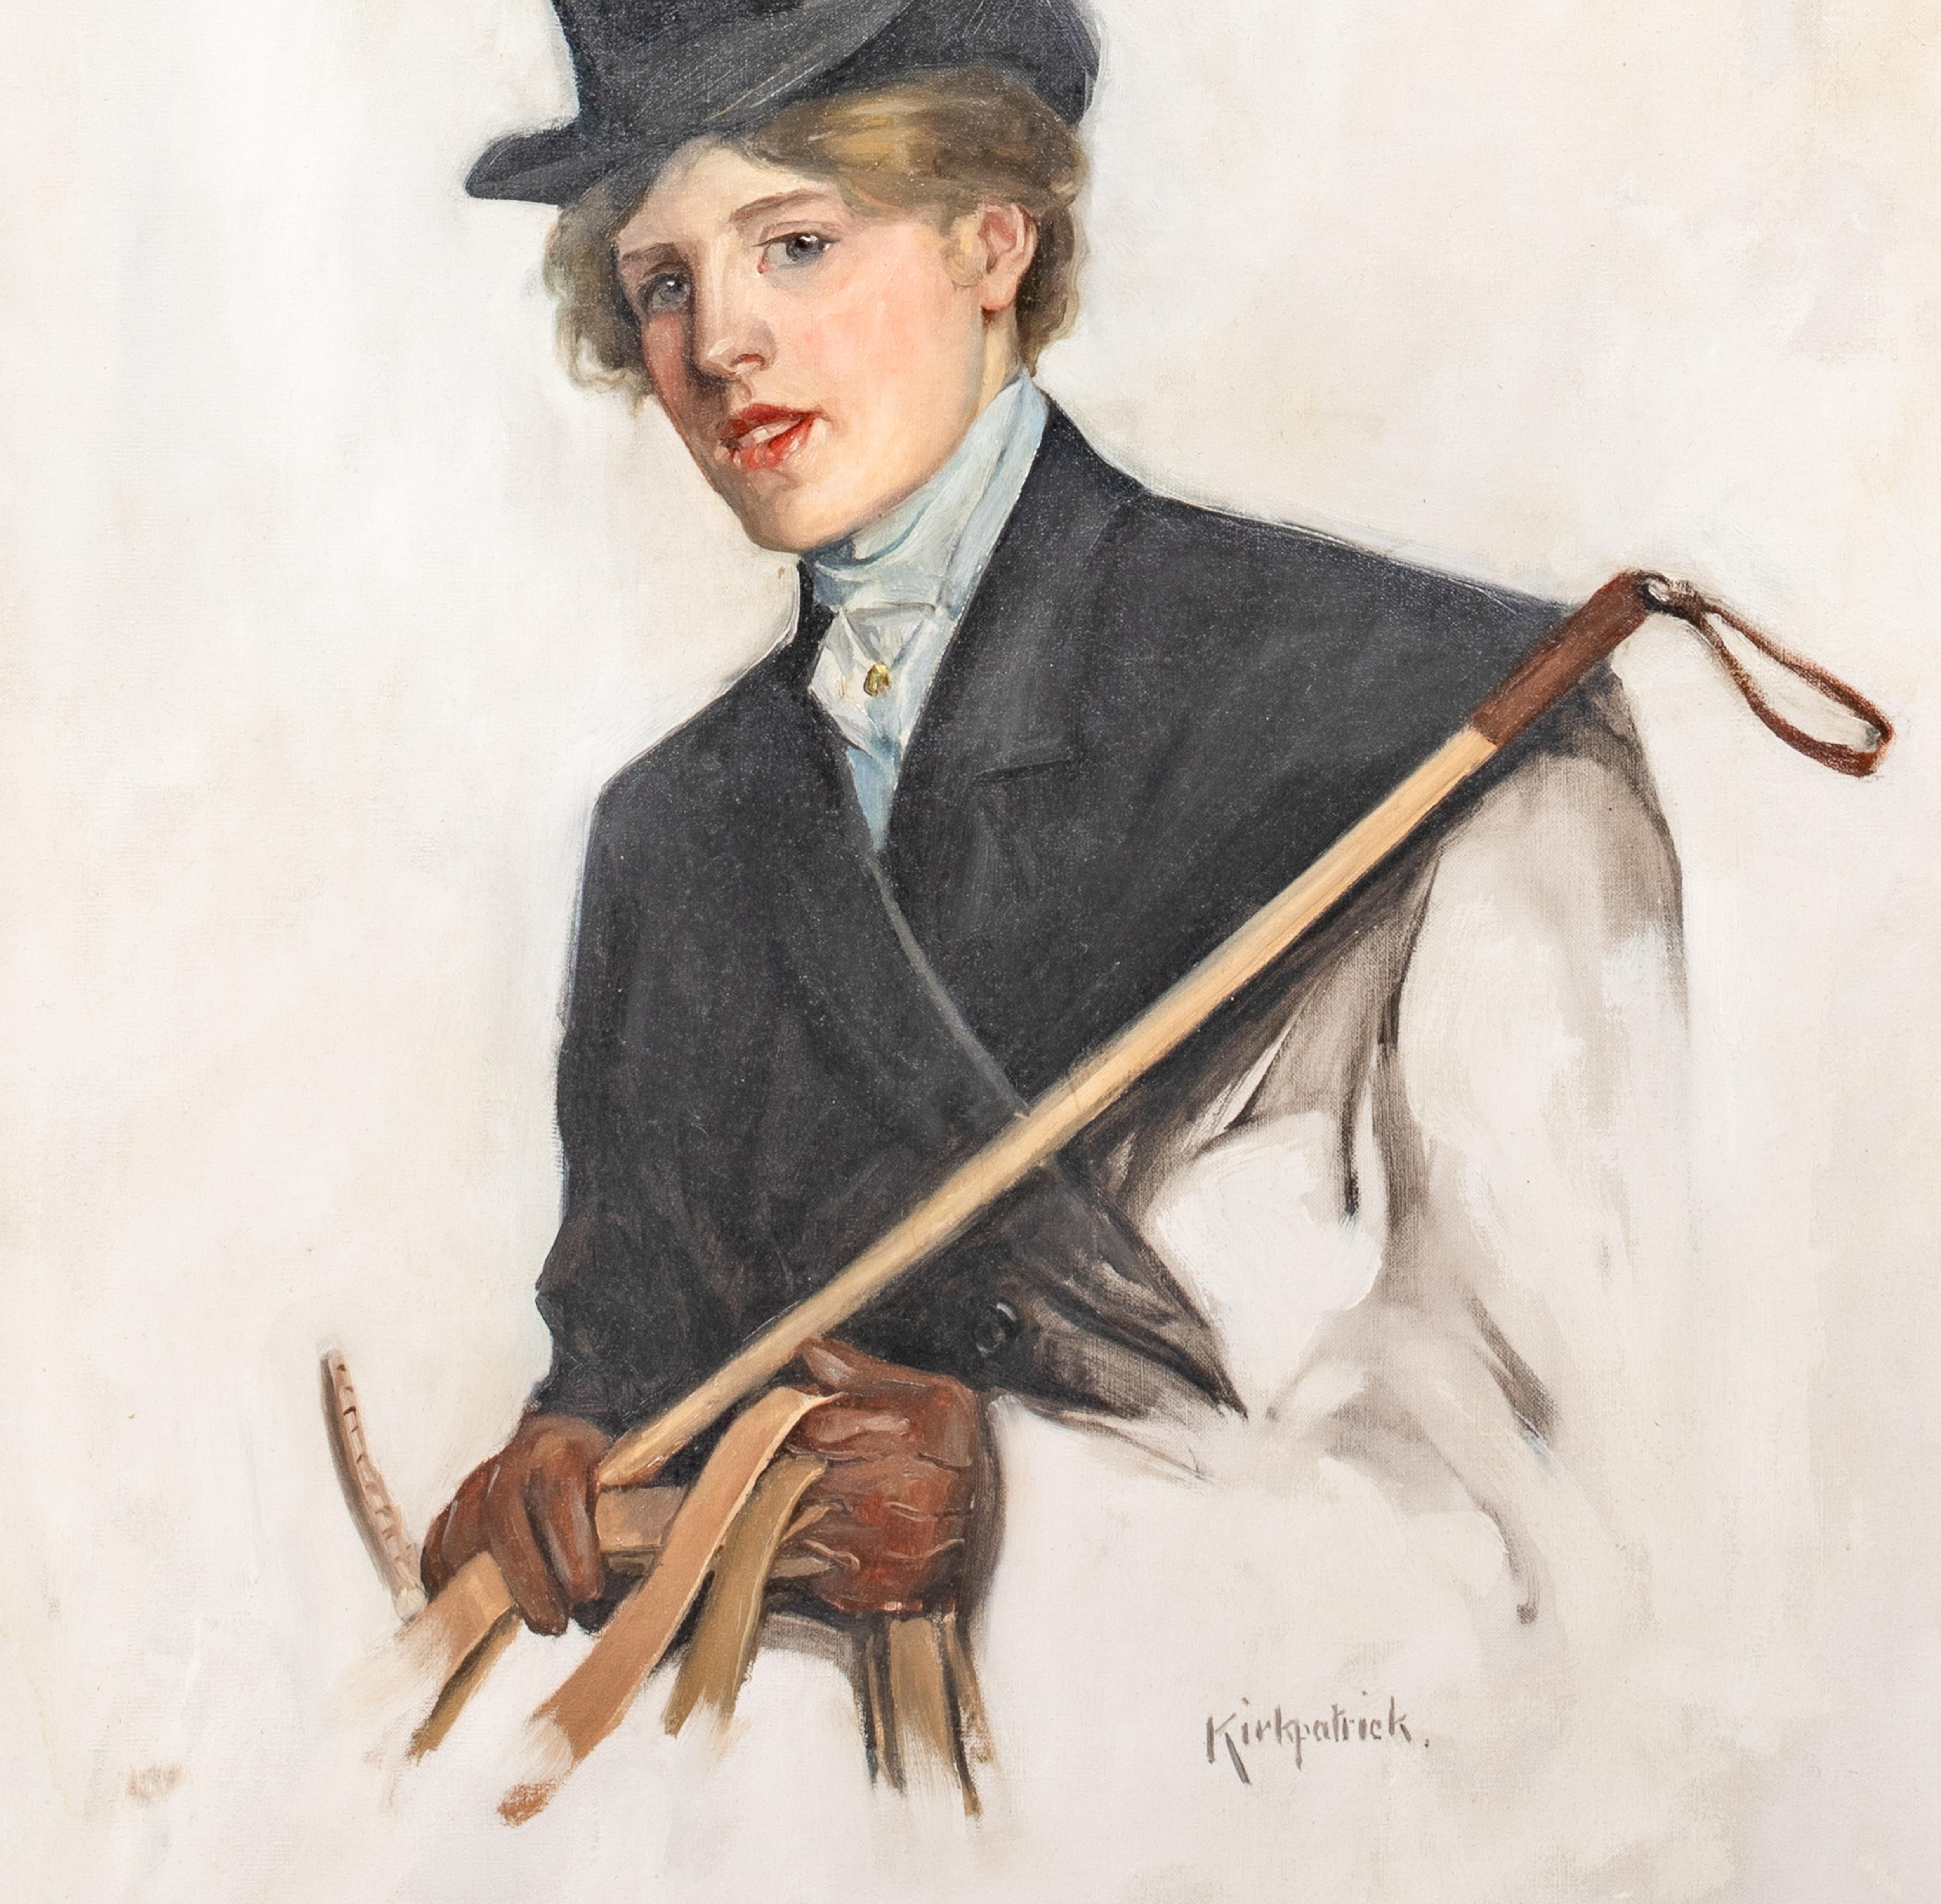 Portrait Of A Lady In Riding Attire, circa 1930 by Ethel KIRKPATRICK (1869-1966) For Sale 7